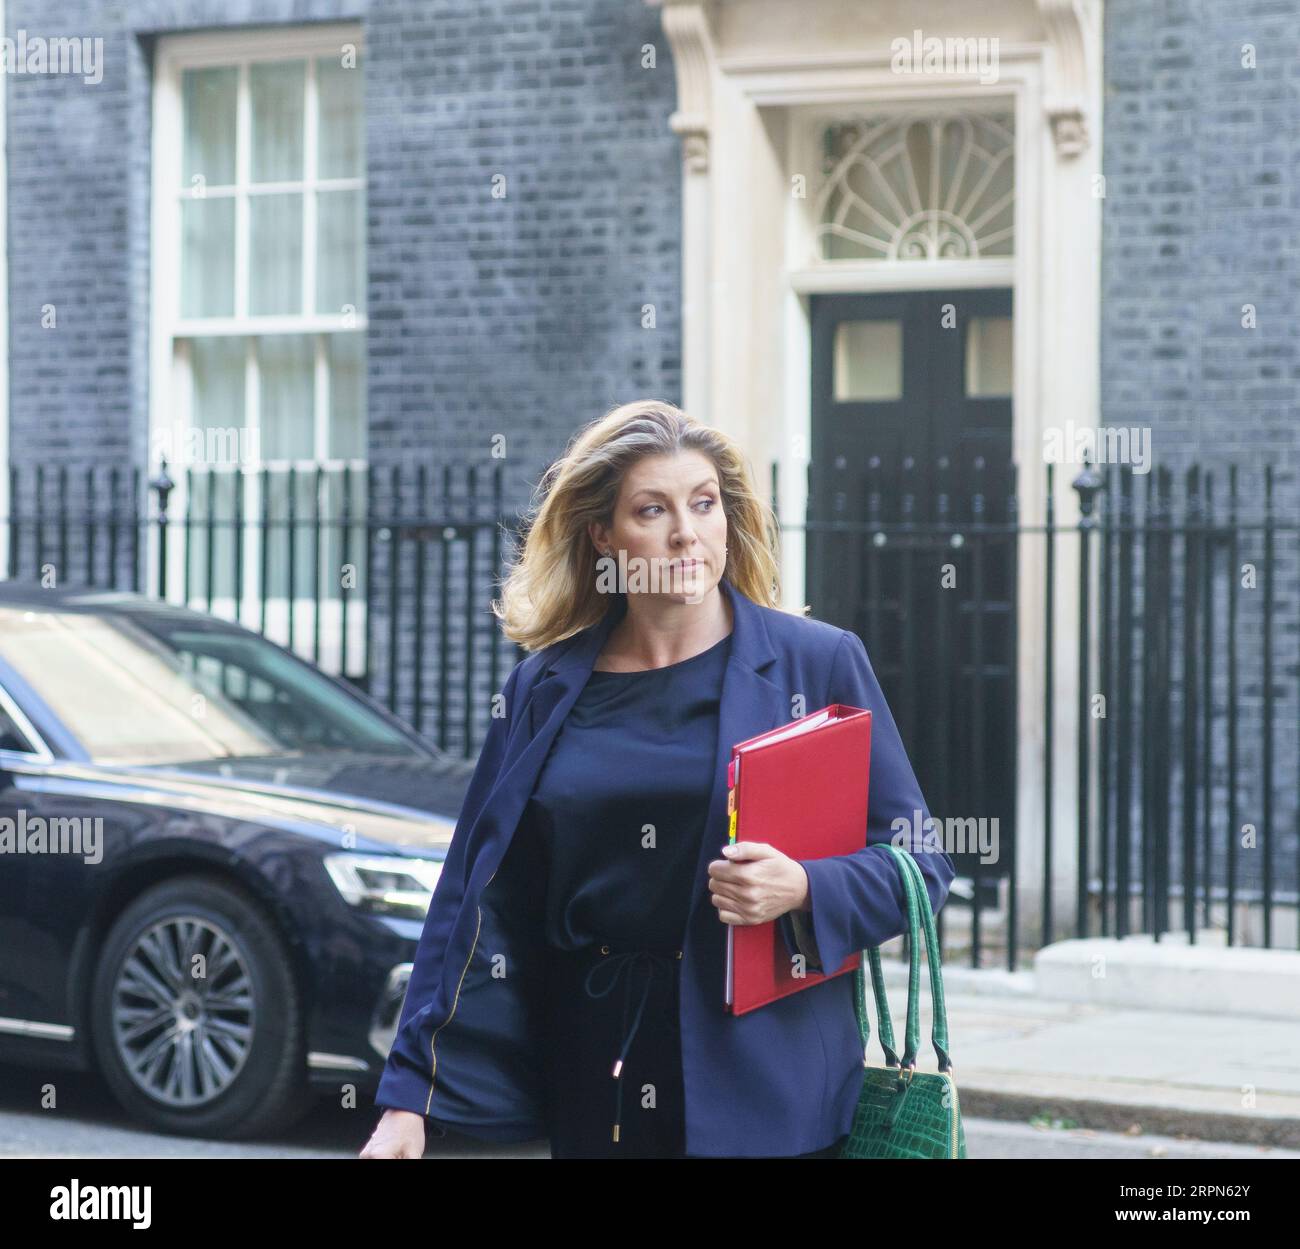 Westminster, London. 5th September 2023. Cabinet minsters leave Downing Street following the first Cabinet meeting since the summer recess. PICTURED: Rt Hon Penny Mordaunt, Lord President of the Council and Leader of the House of Commons Bridget Catterall AlamyLiveNews. Stock Photo